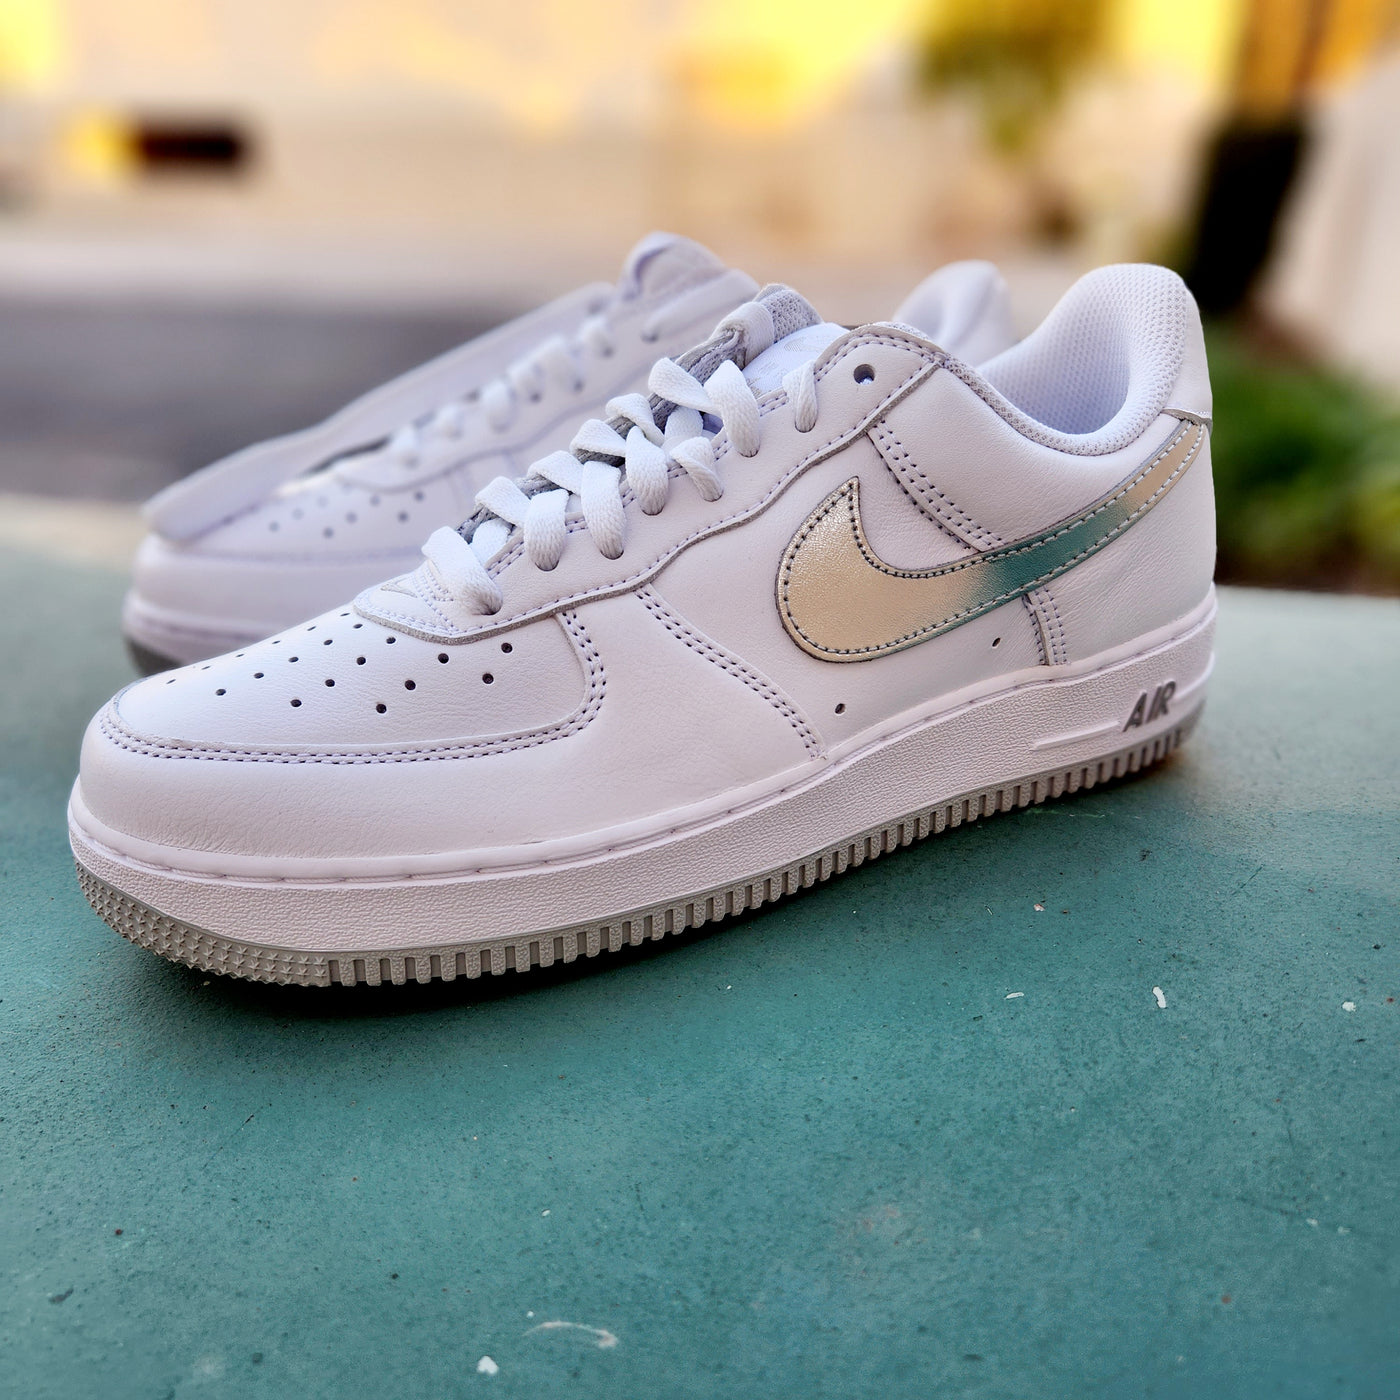 Where to buy Nike Air Force 1 Low “Color of the Month” Metallic